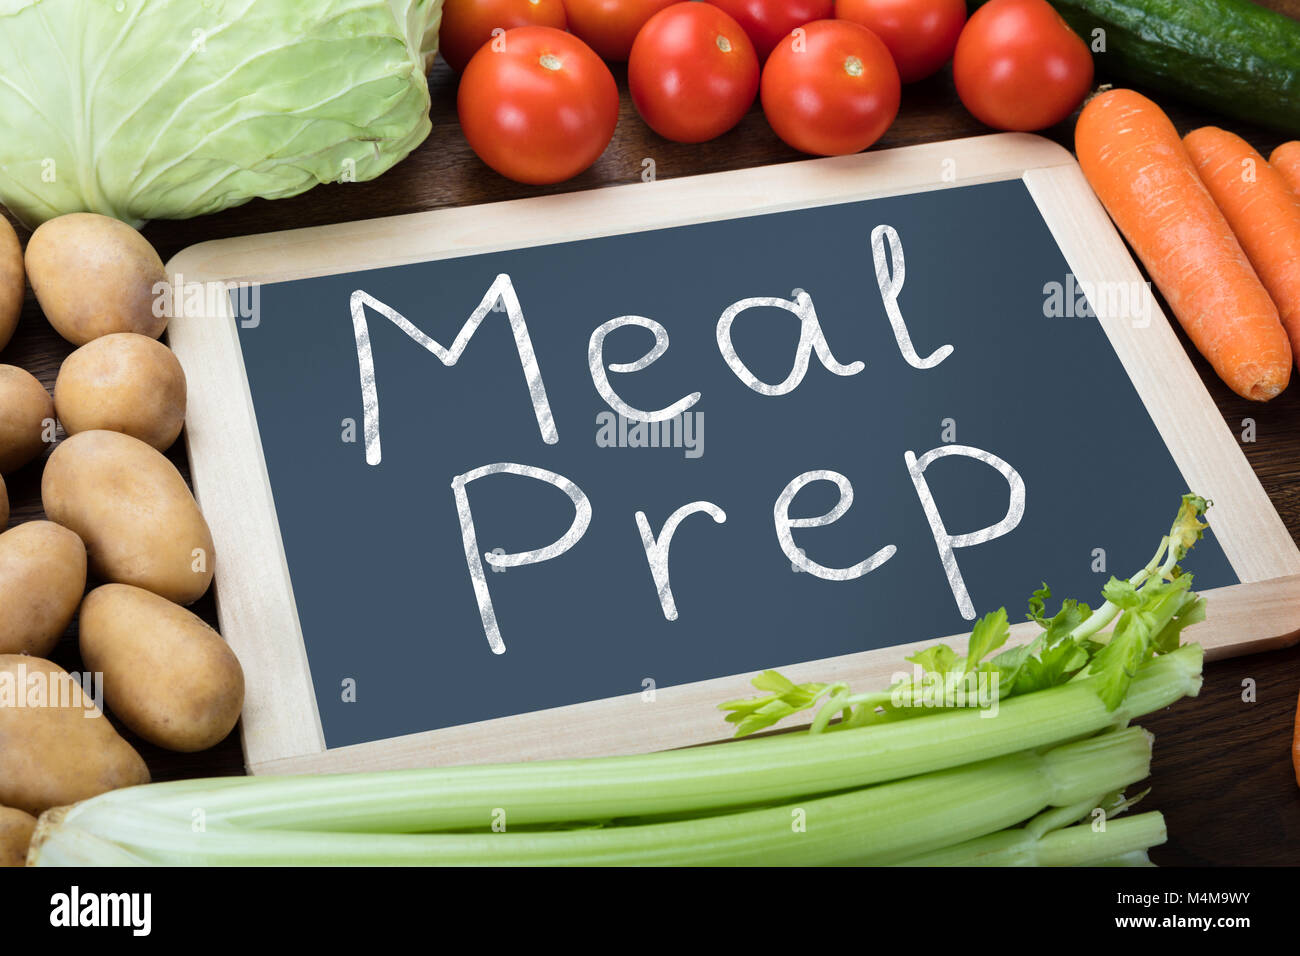 Elevated View Of Fresh Organic Vegetables With Meal Preparation Words Written On Slate Stock Photo